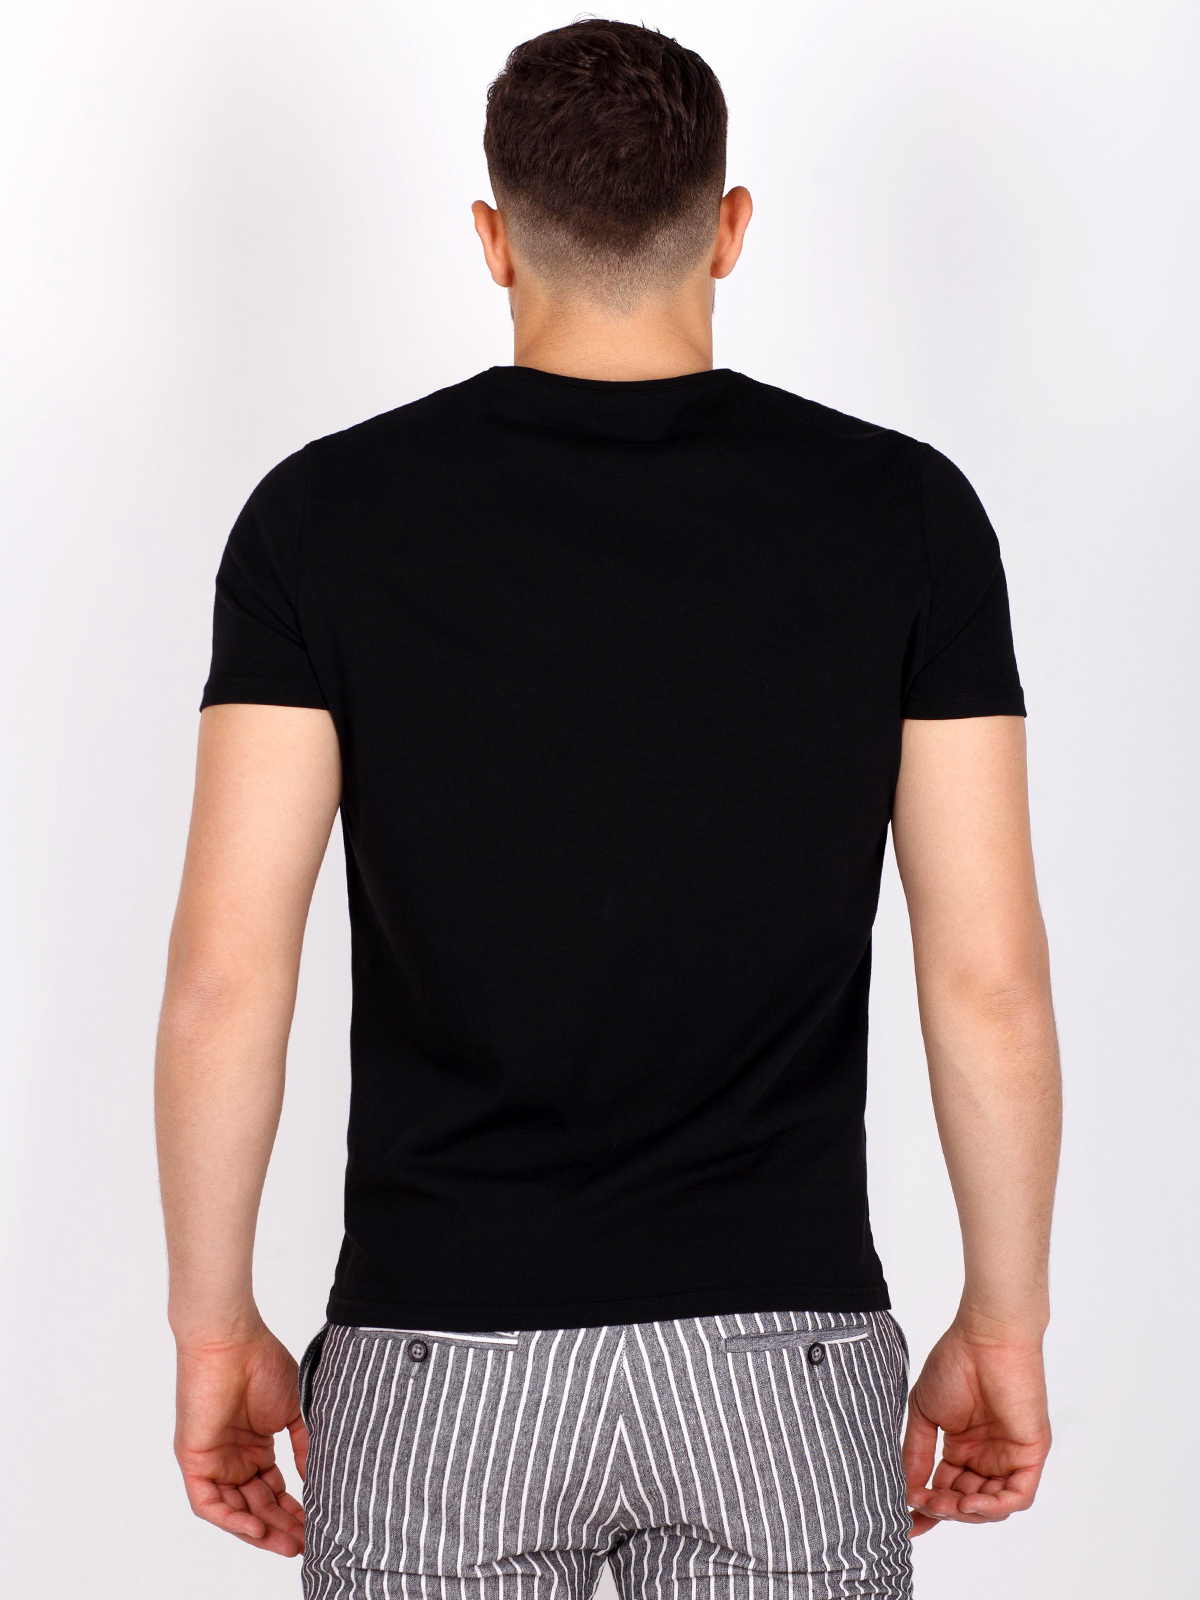 Black tshirt with a panel in gray melan - 96415 € 16.31 img4